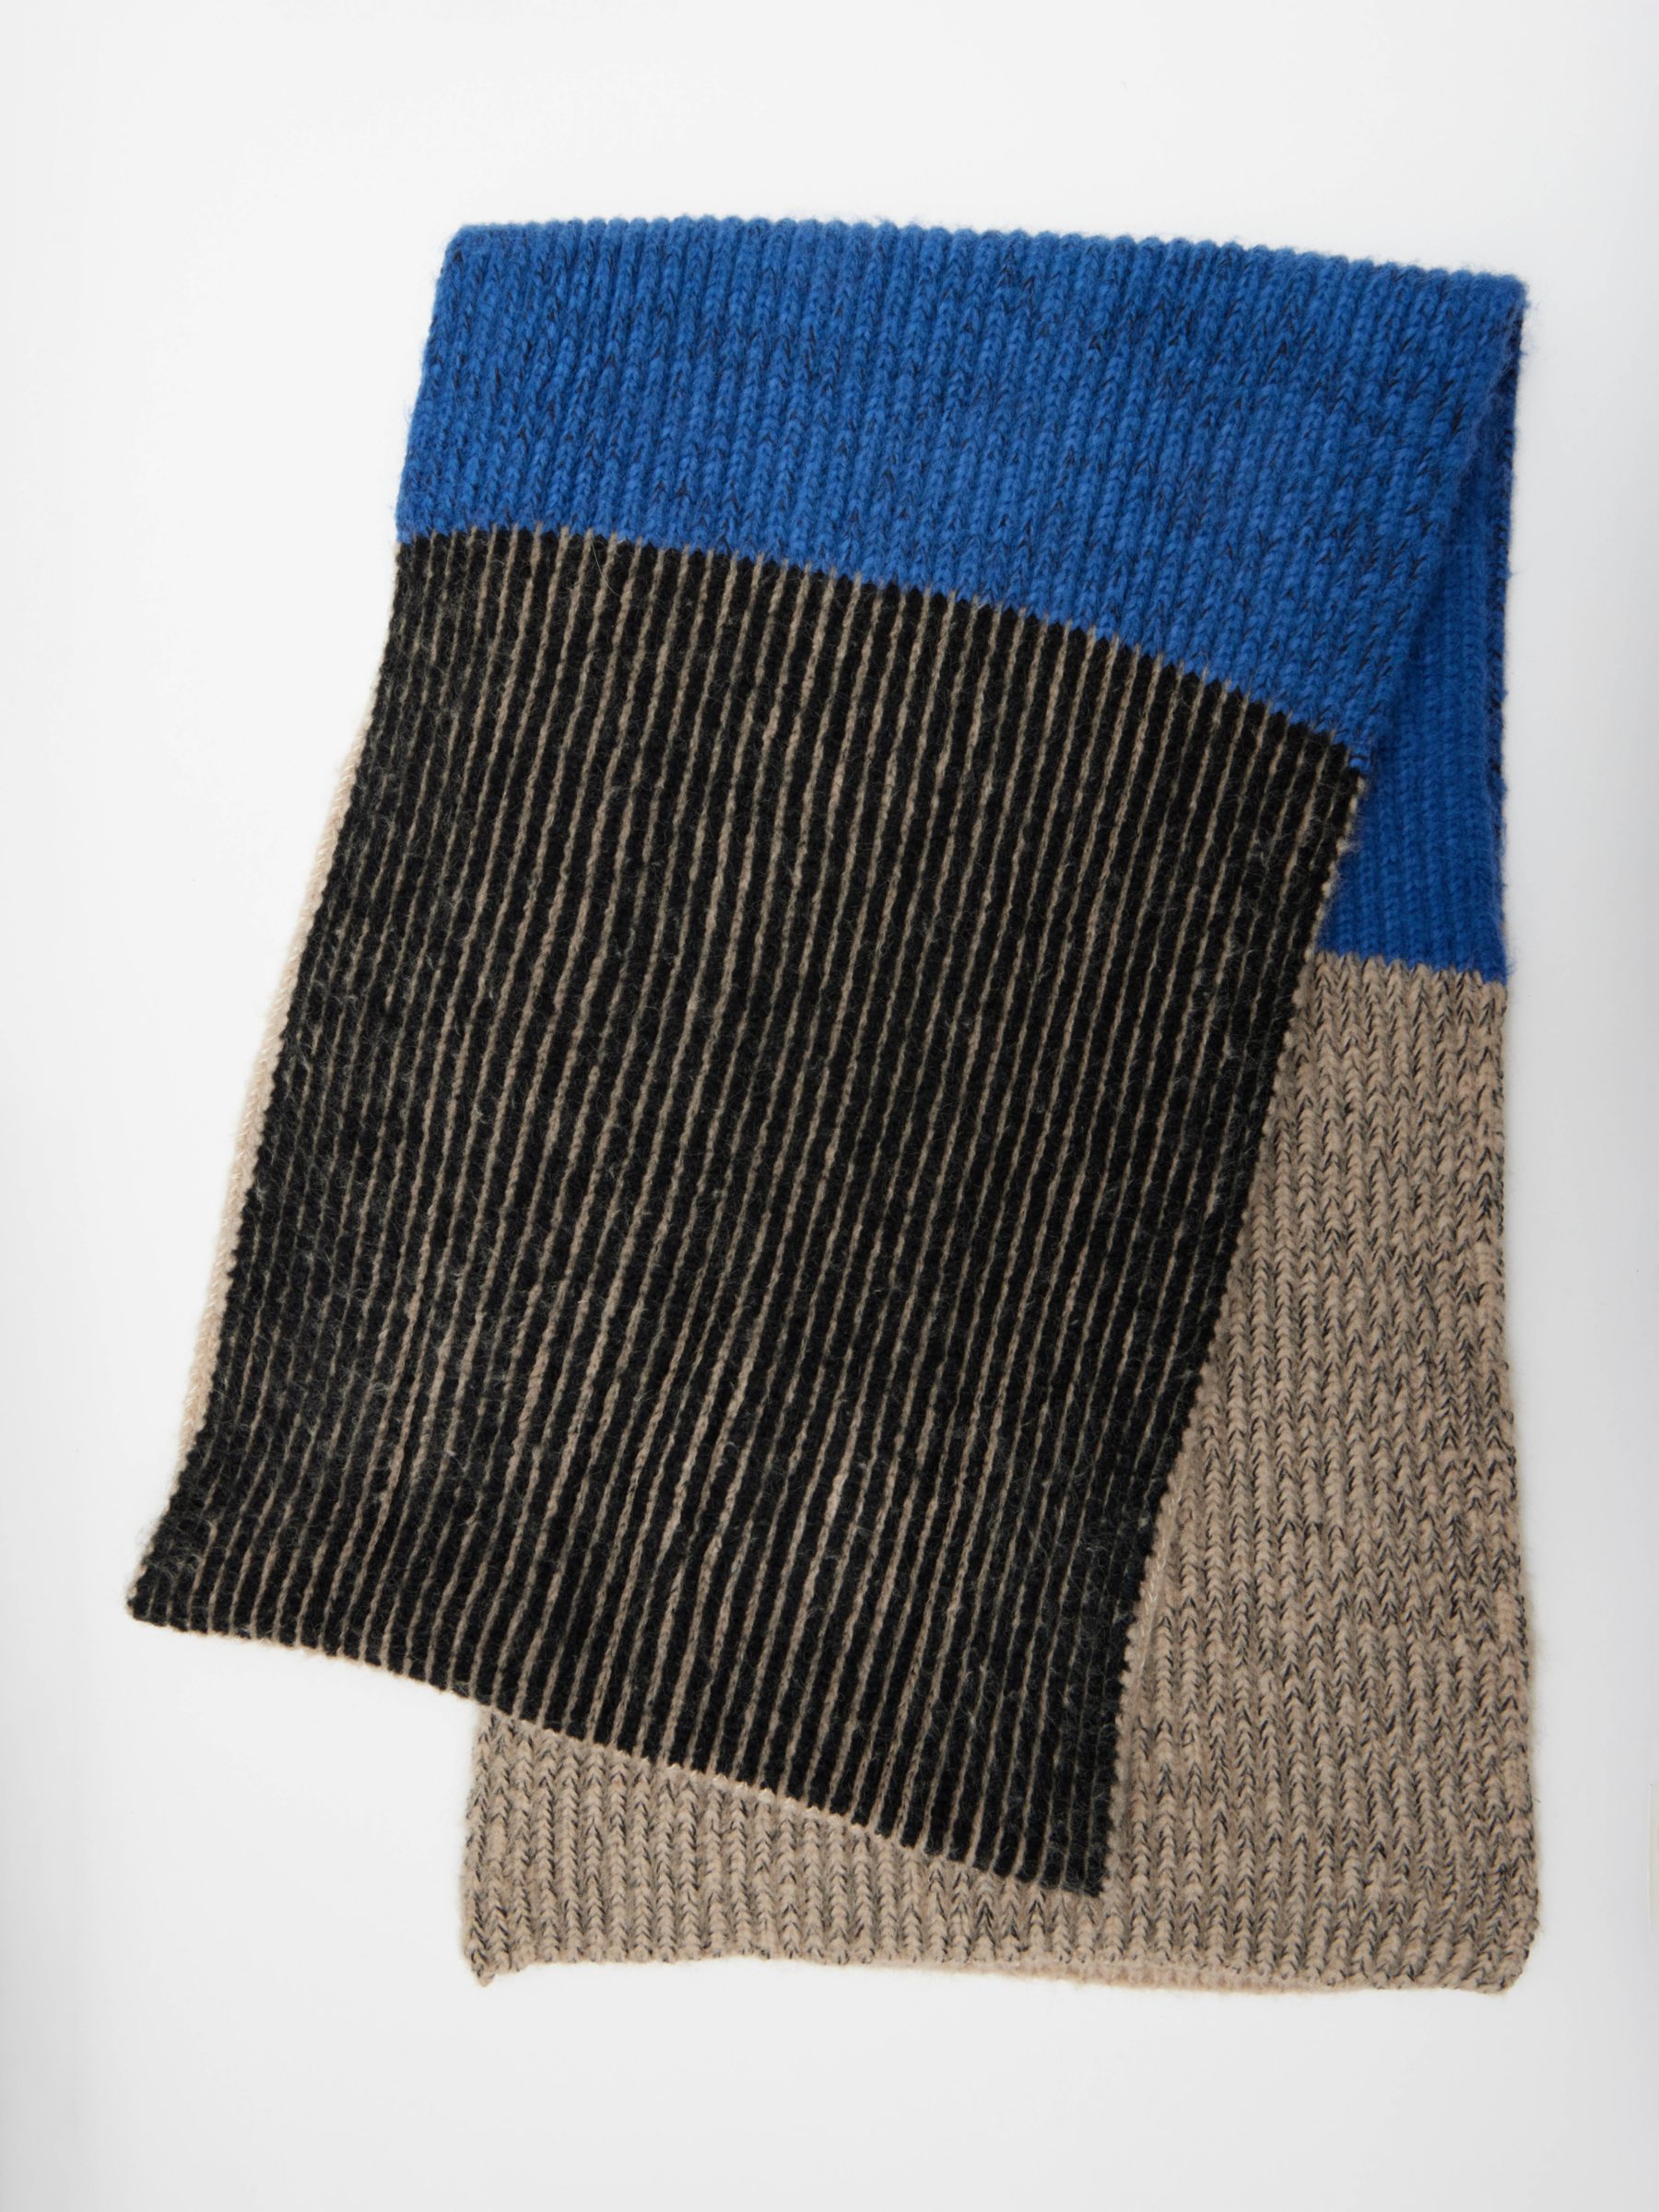 HUSH Margo Knitted Colourblock Scarf, Multi, One Size